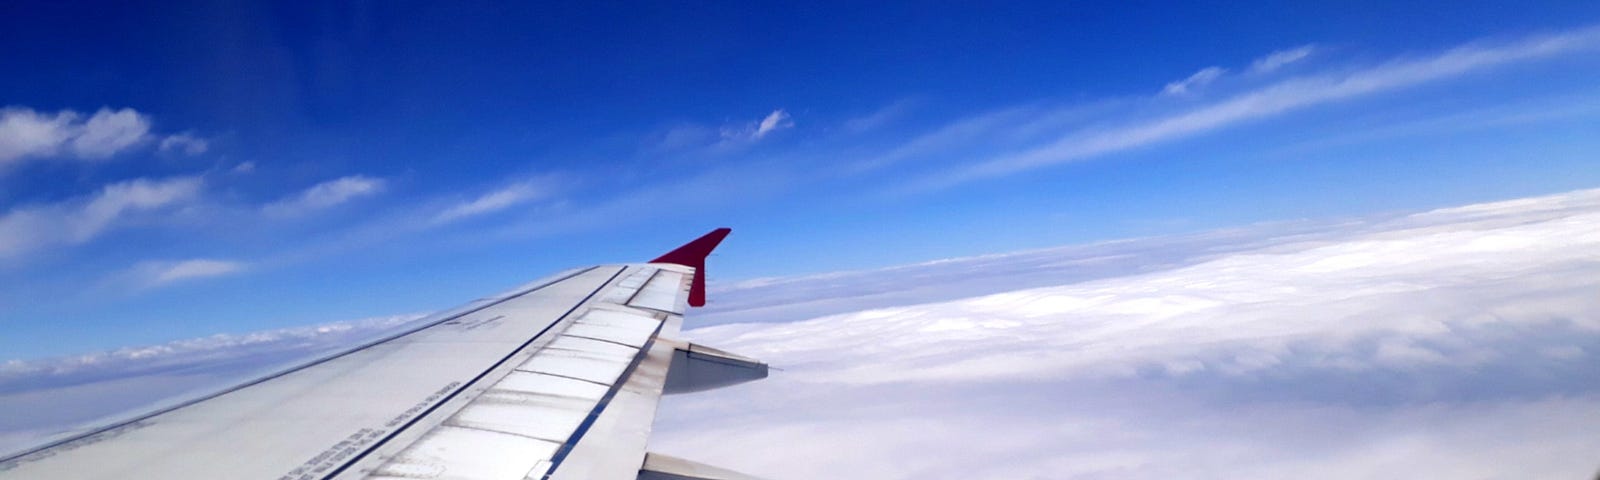 Image through an airplane window showing wing of plane above clouds